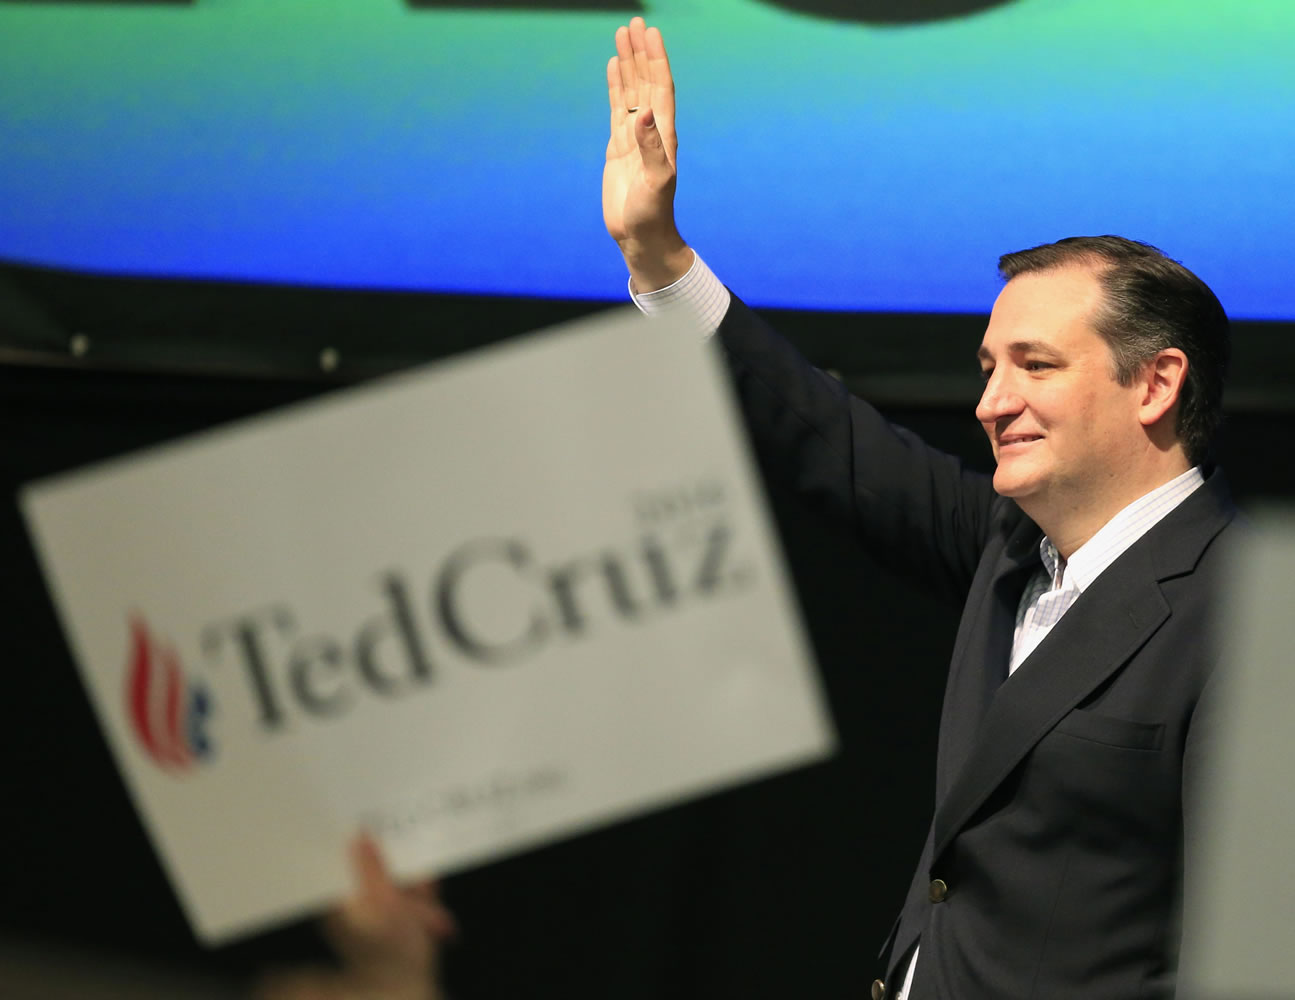 Republican presidential candidate Sen. Ted Cruz, R-Texas, waves to the crowd Saturday at the GOP caucus in Wichita, Kan.